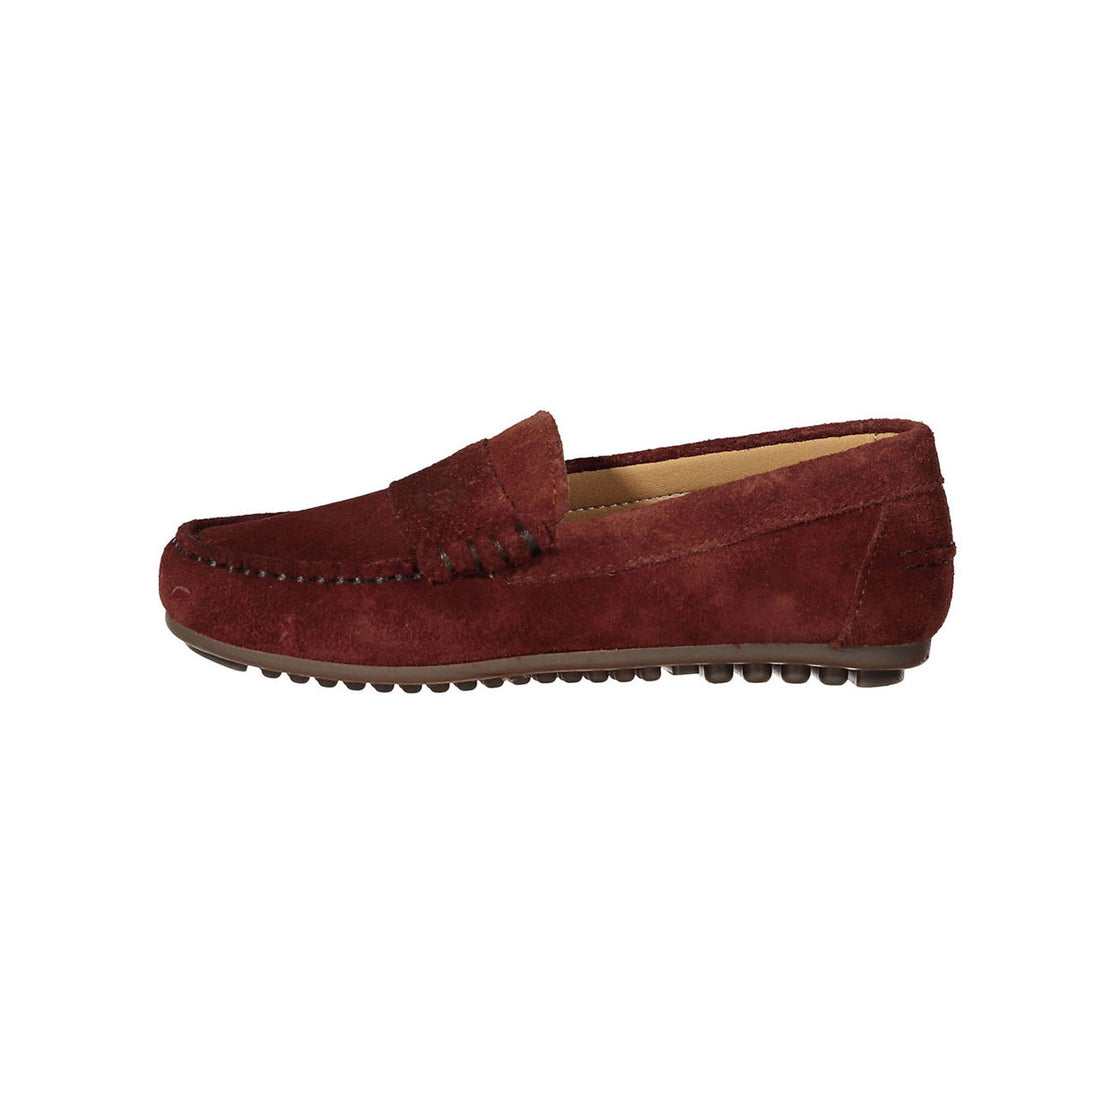 Ladida Rust Suede Loafer